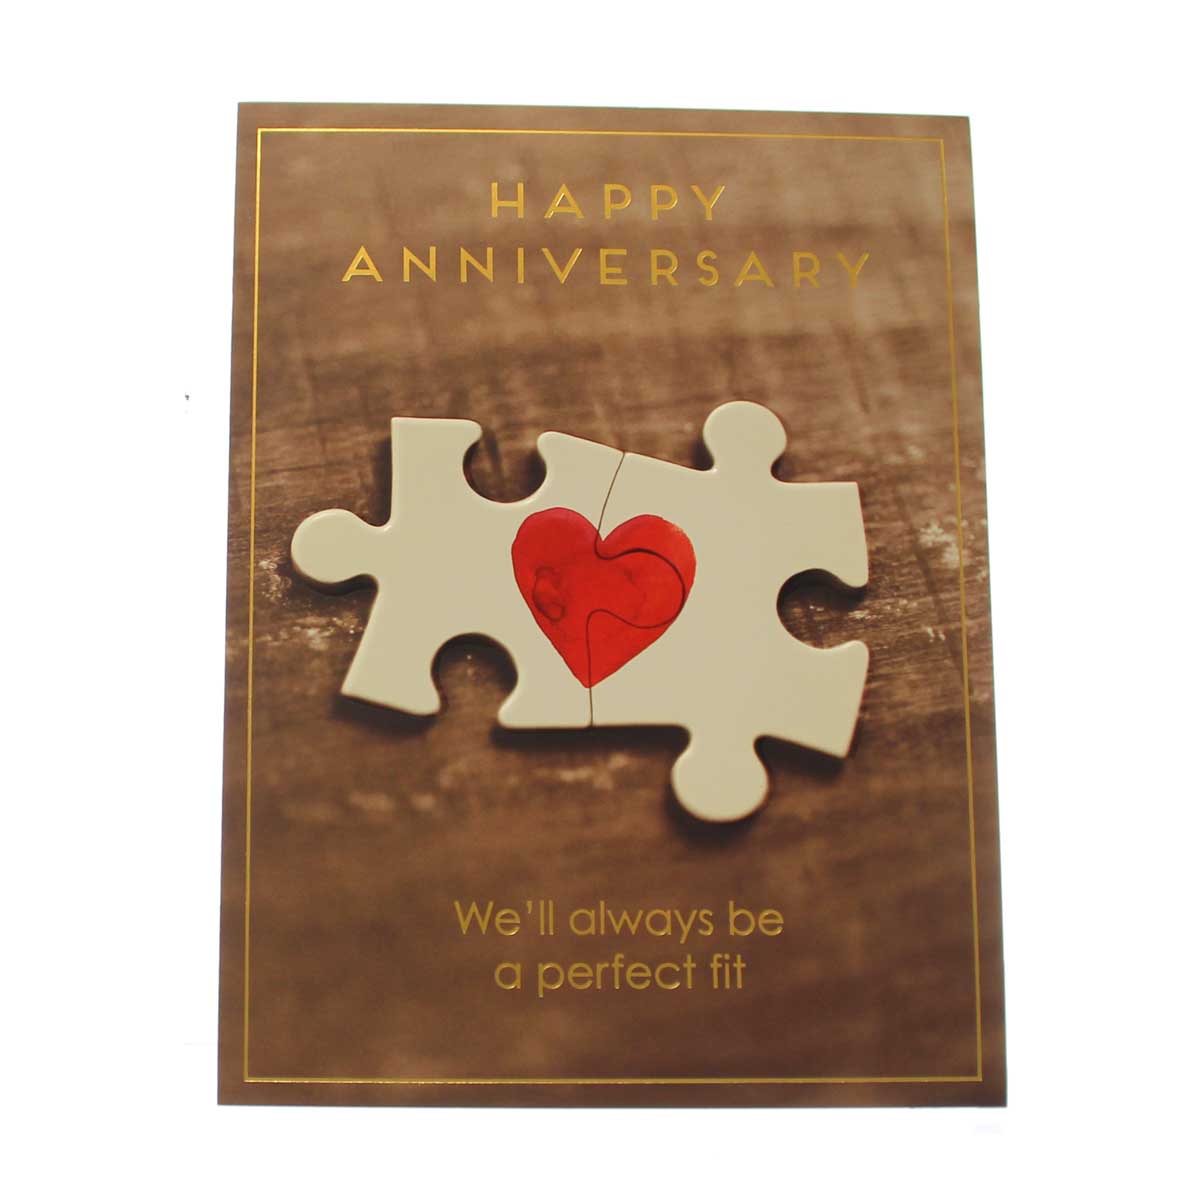 Anniversary Card: Happy Anniversary We'll always be a perfect fit